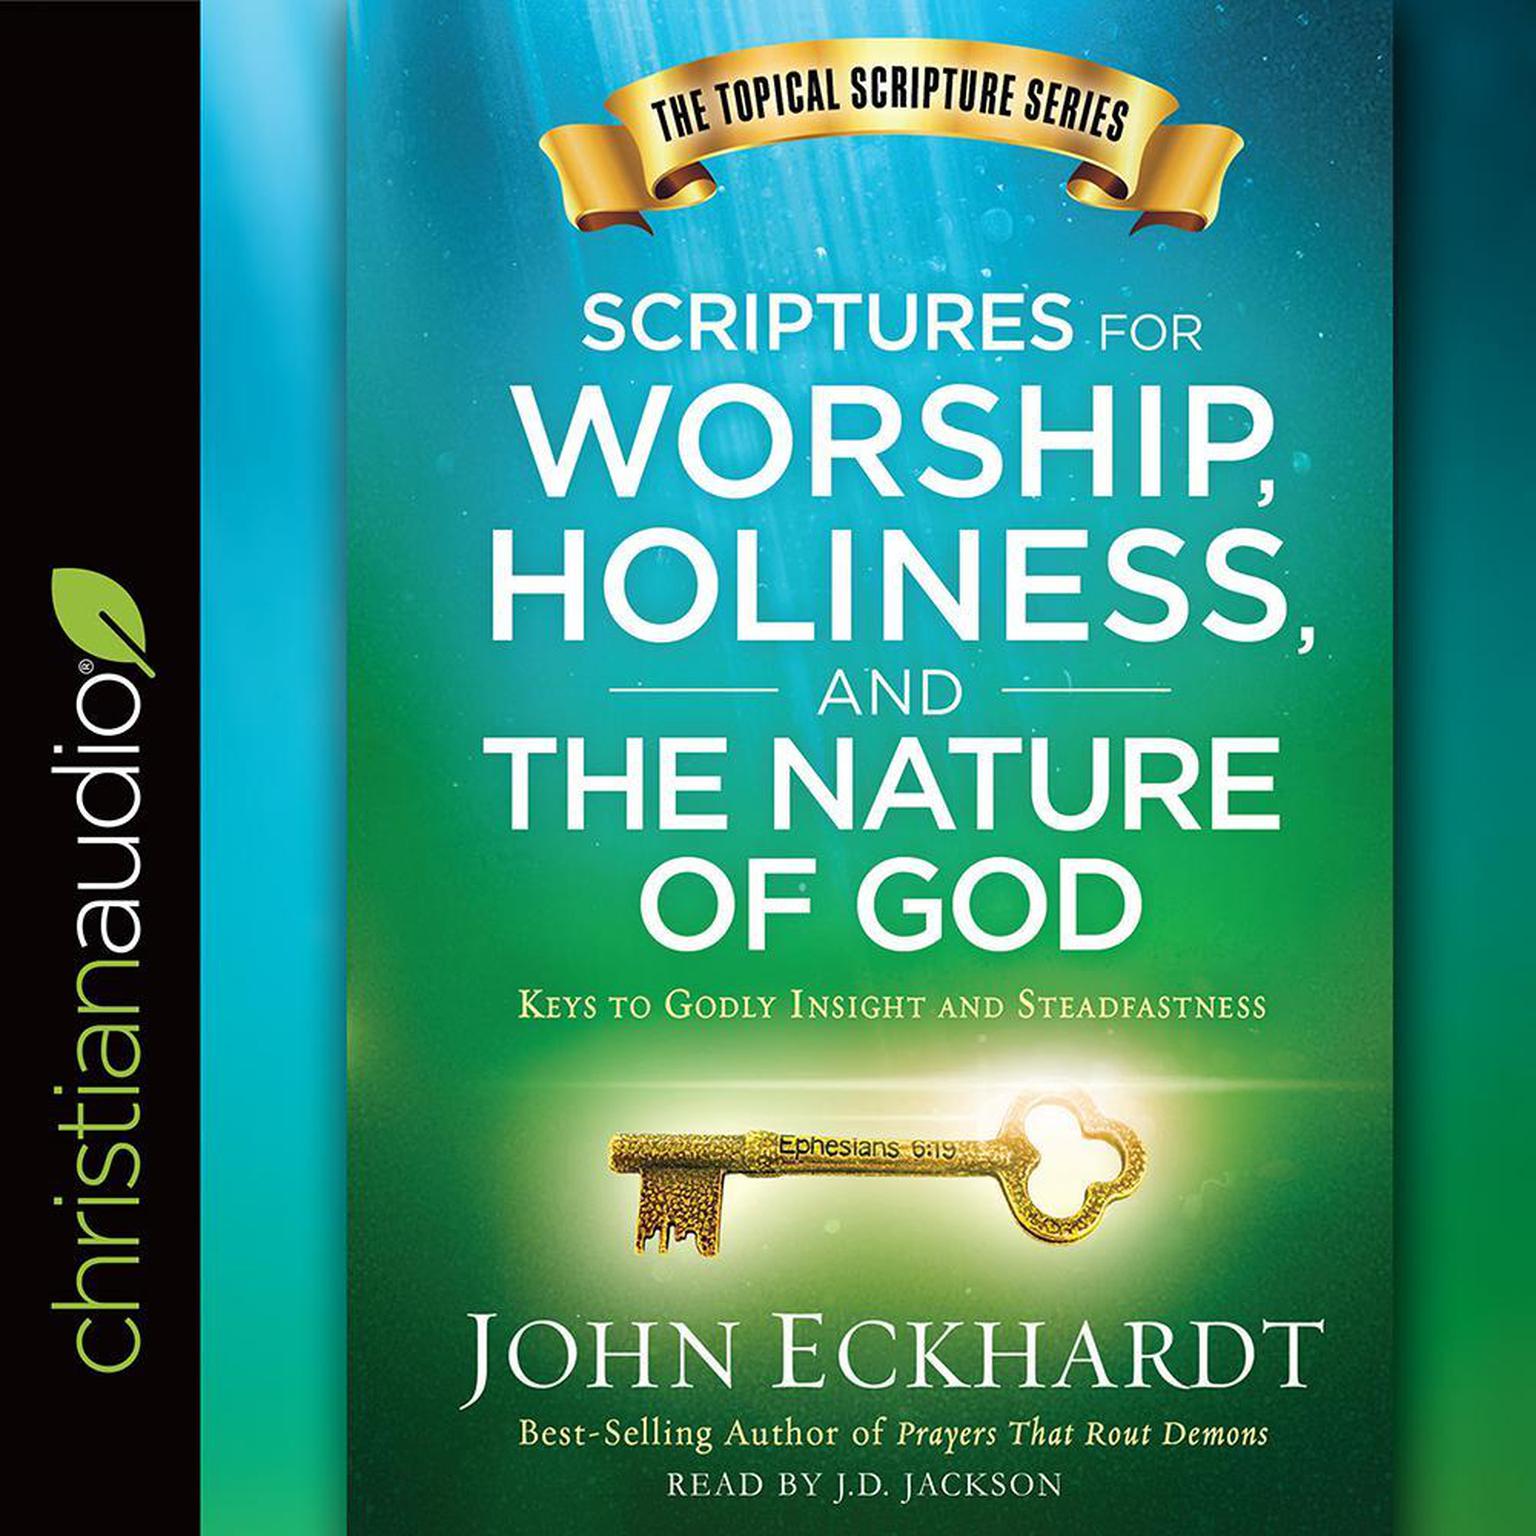 Scriptures for Worship, Holiness, and the Nature of God: Keys to Godly Insight and Steadfastness Audiobook, by John Eckhardt